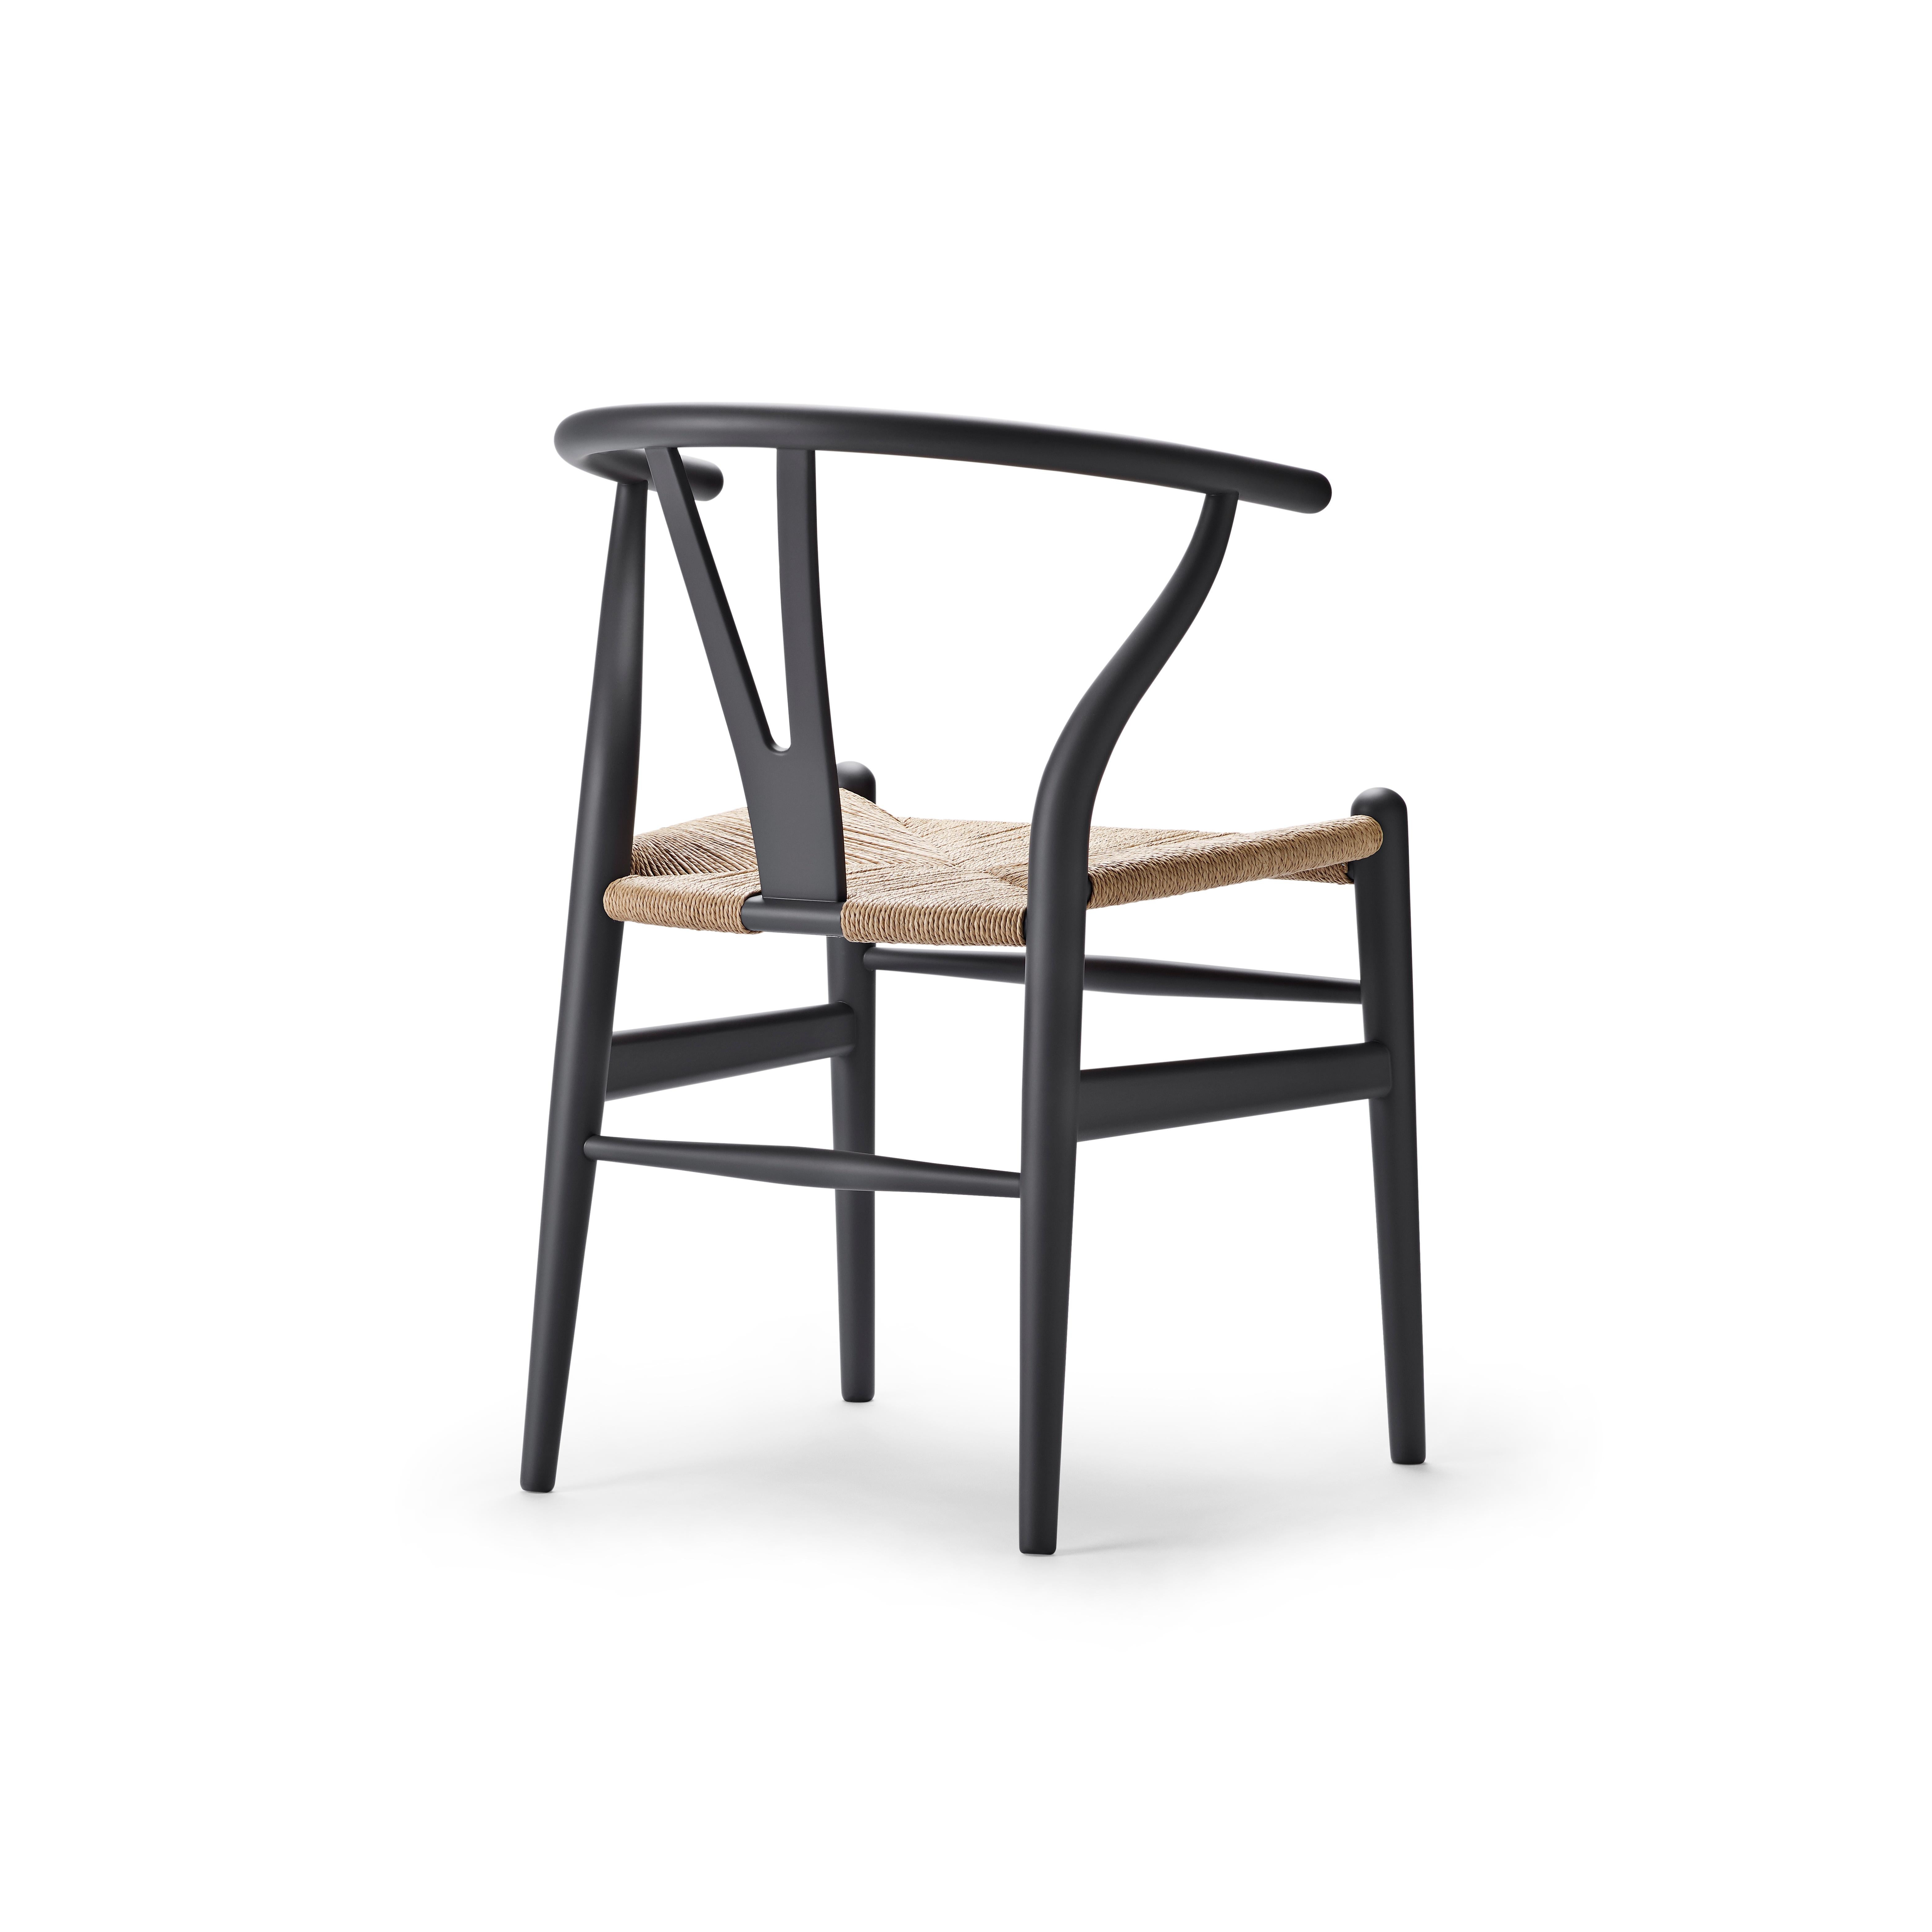 Gray (Soft Gray) CH24 Wishbone Chair in Soft Colors by Hans J. Wegner 3